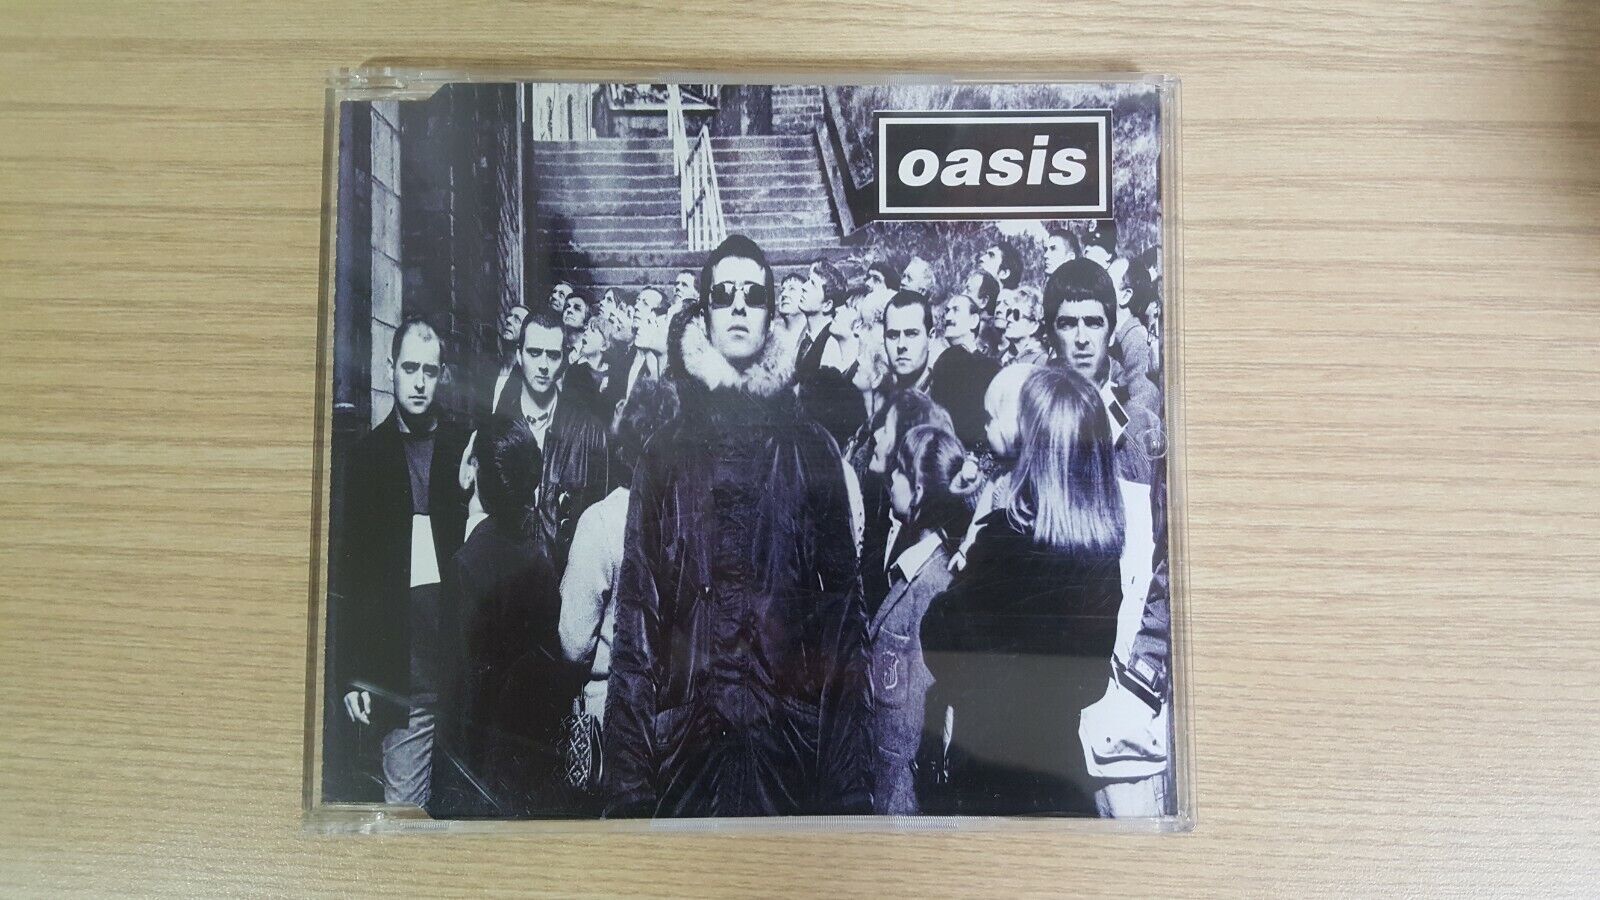 Oasis - D'You Know What I Mean? 1997 Korea Single CD 